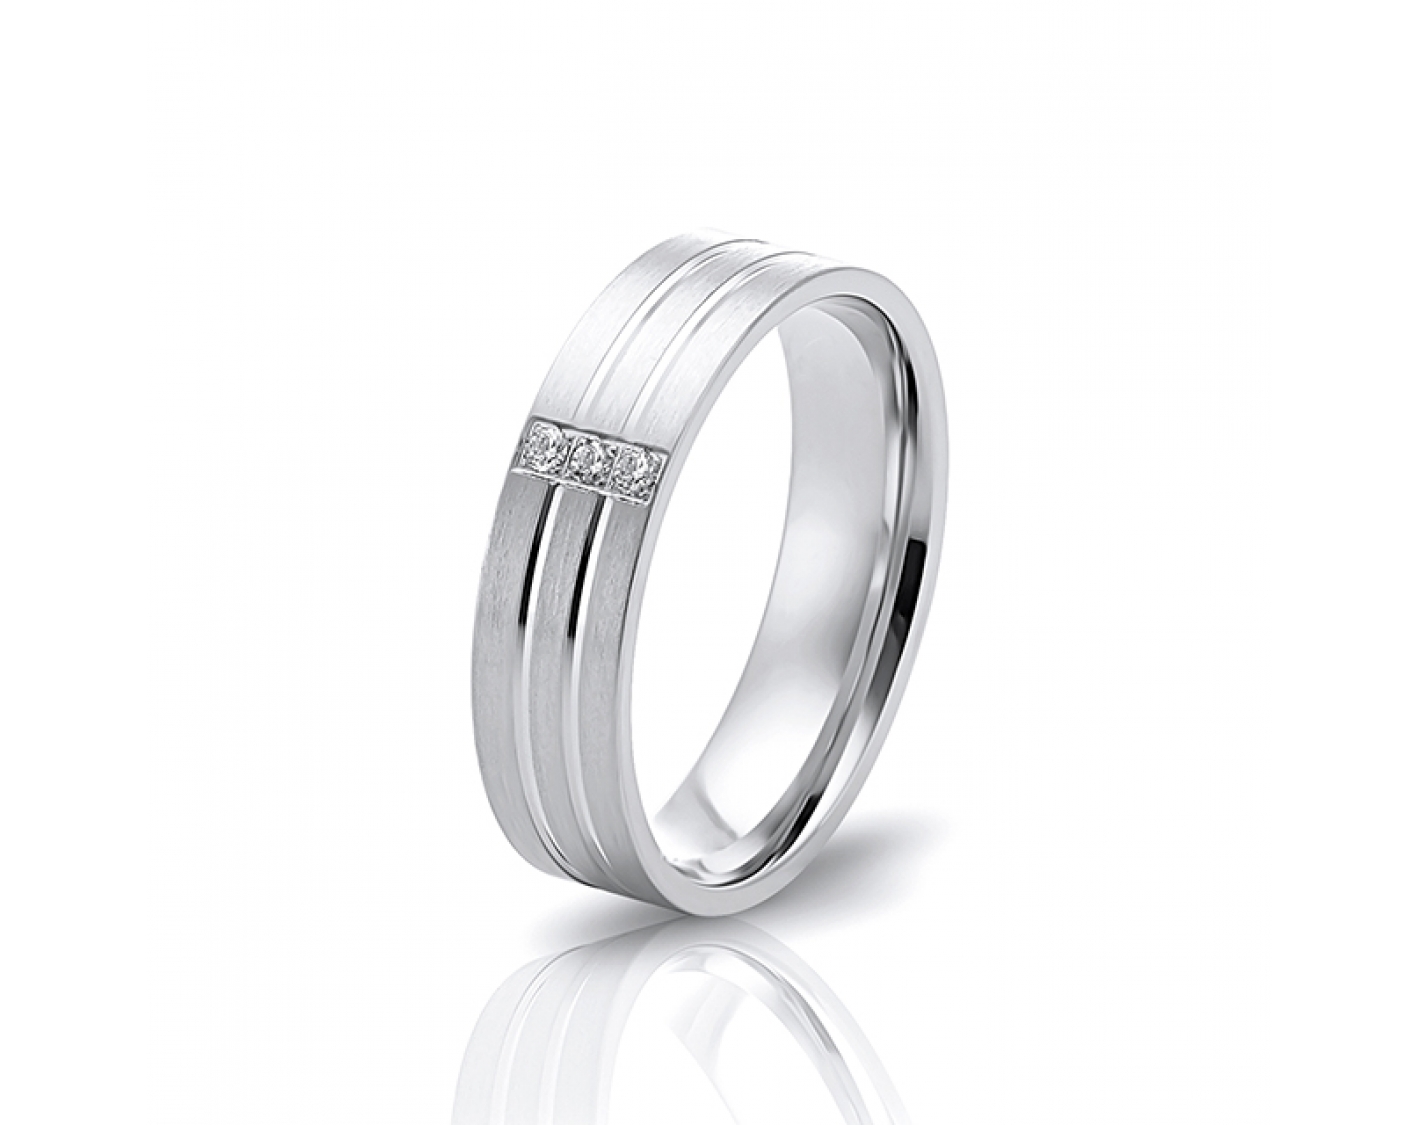 18k white gold 5mm matte wedding band with two shiny lines and diamonds